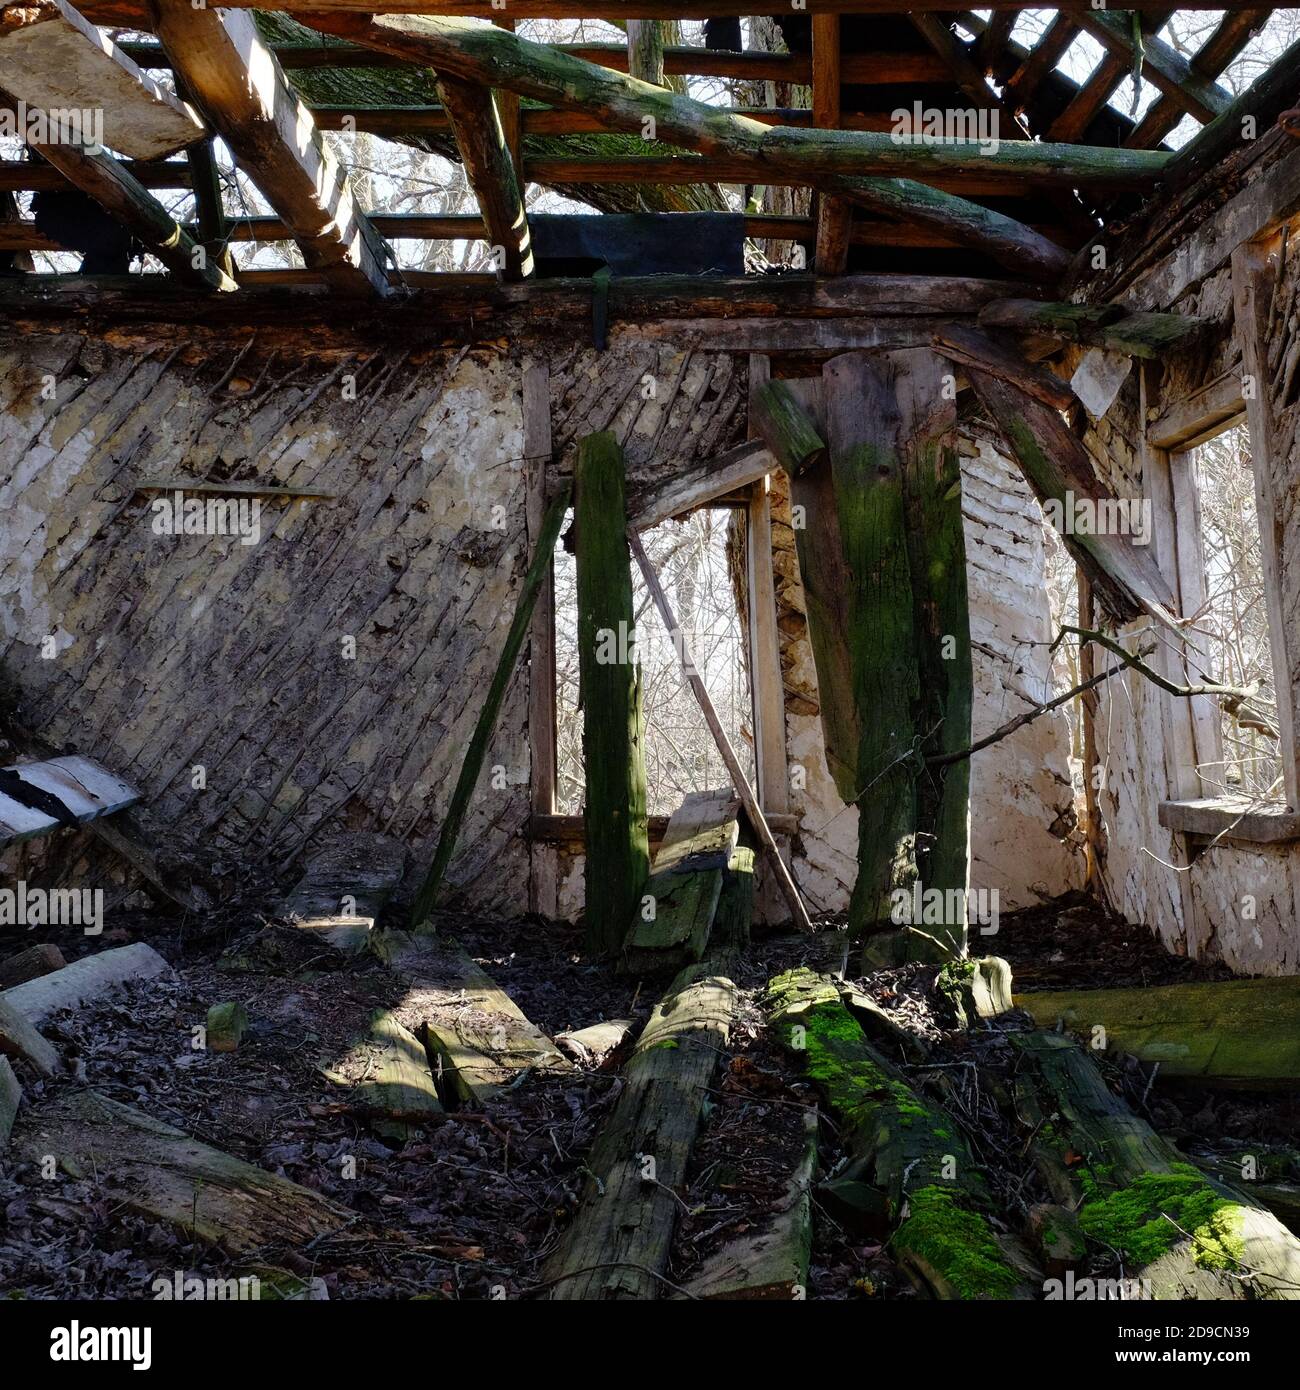 The ruins of an old abandoned house. Inside view. A dilapidated rural house. Stock Photo